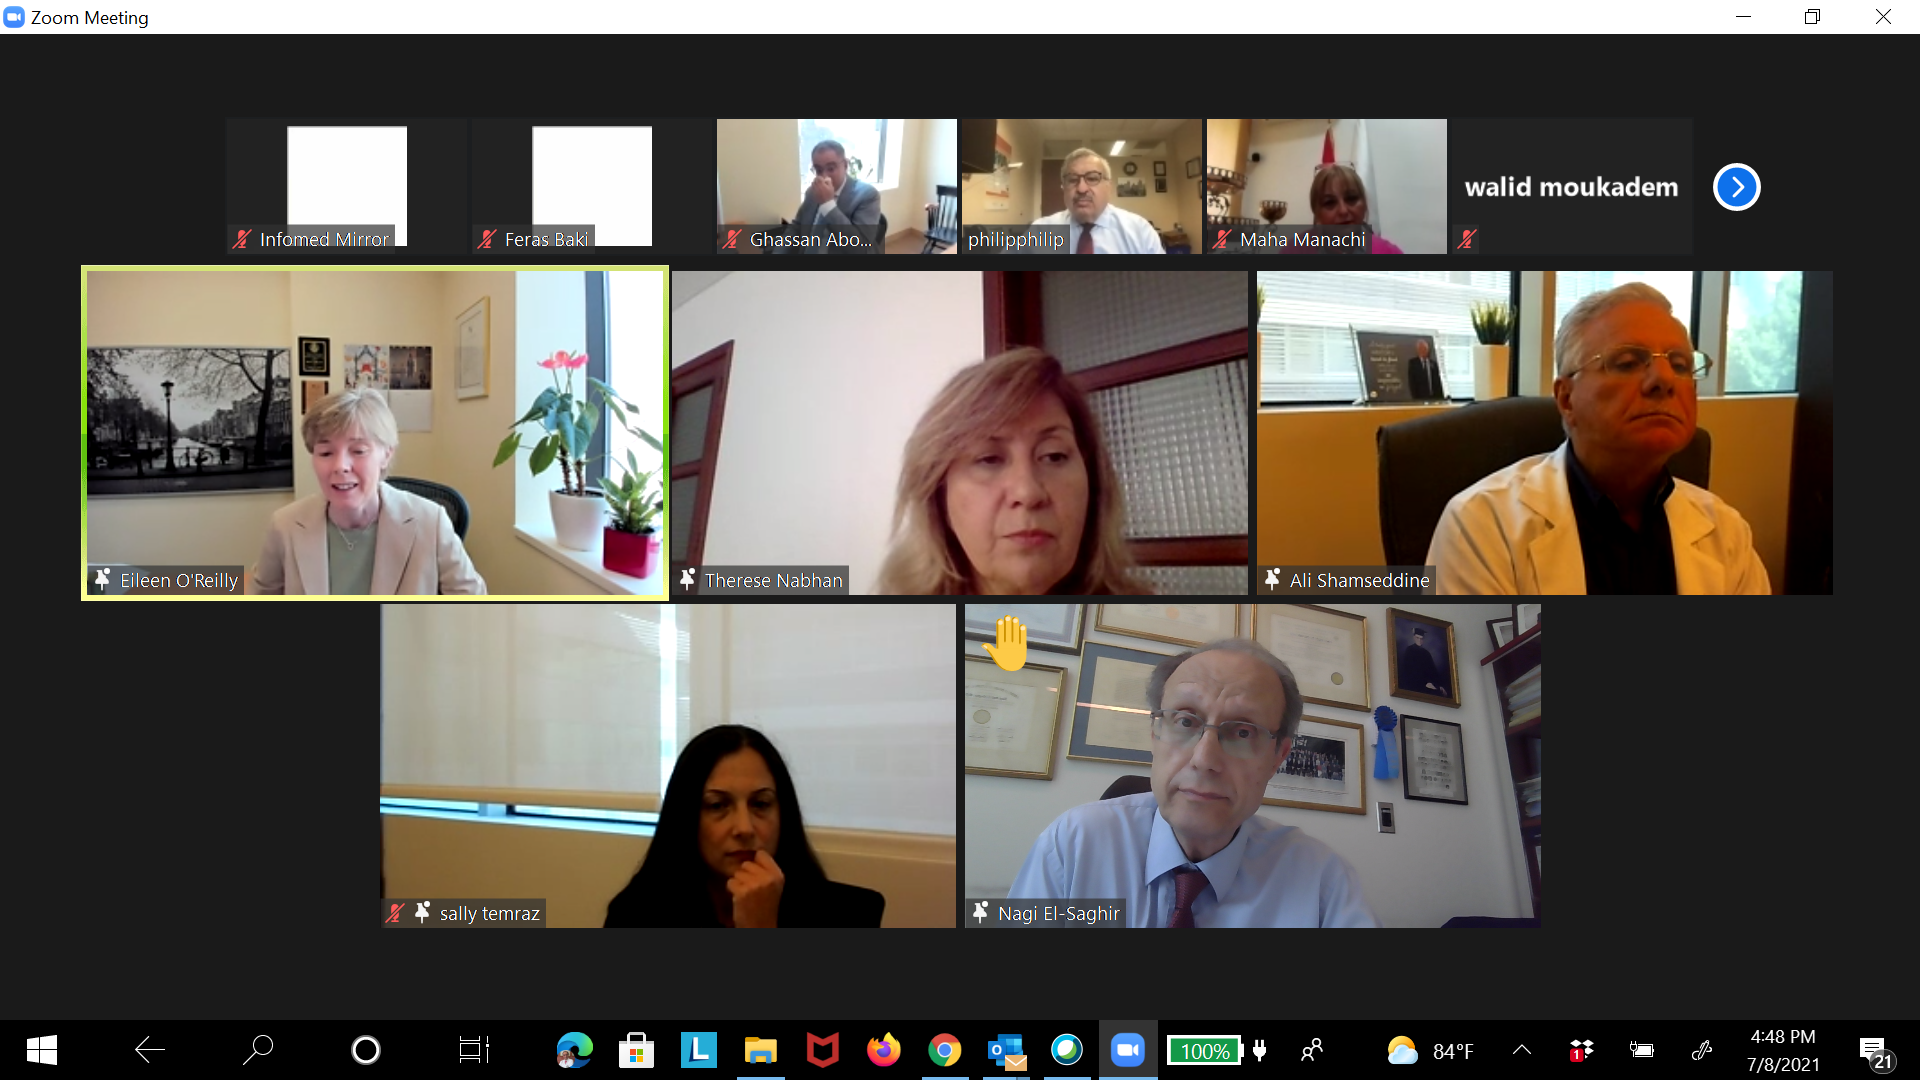 Best of ASCO Lebanon 2021 GI chairs and faculty during a discussion on Zoom.